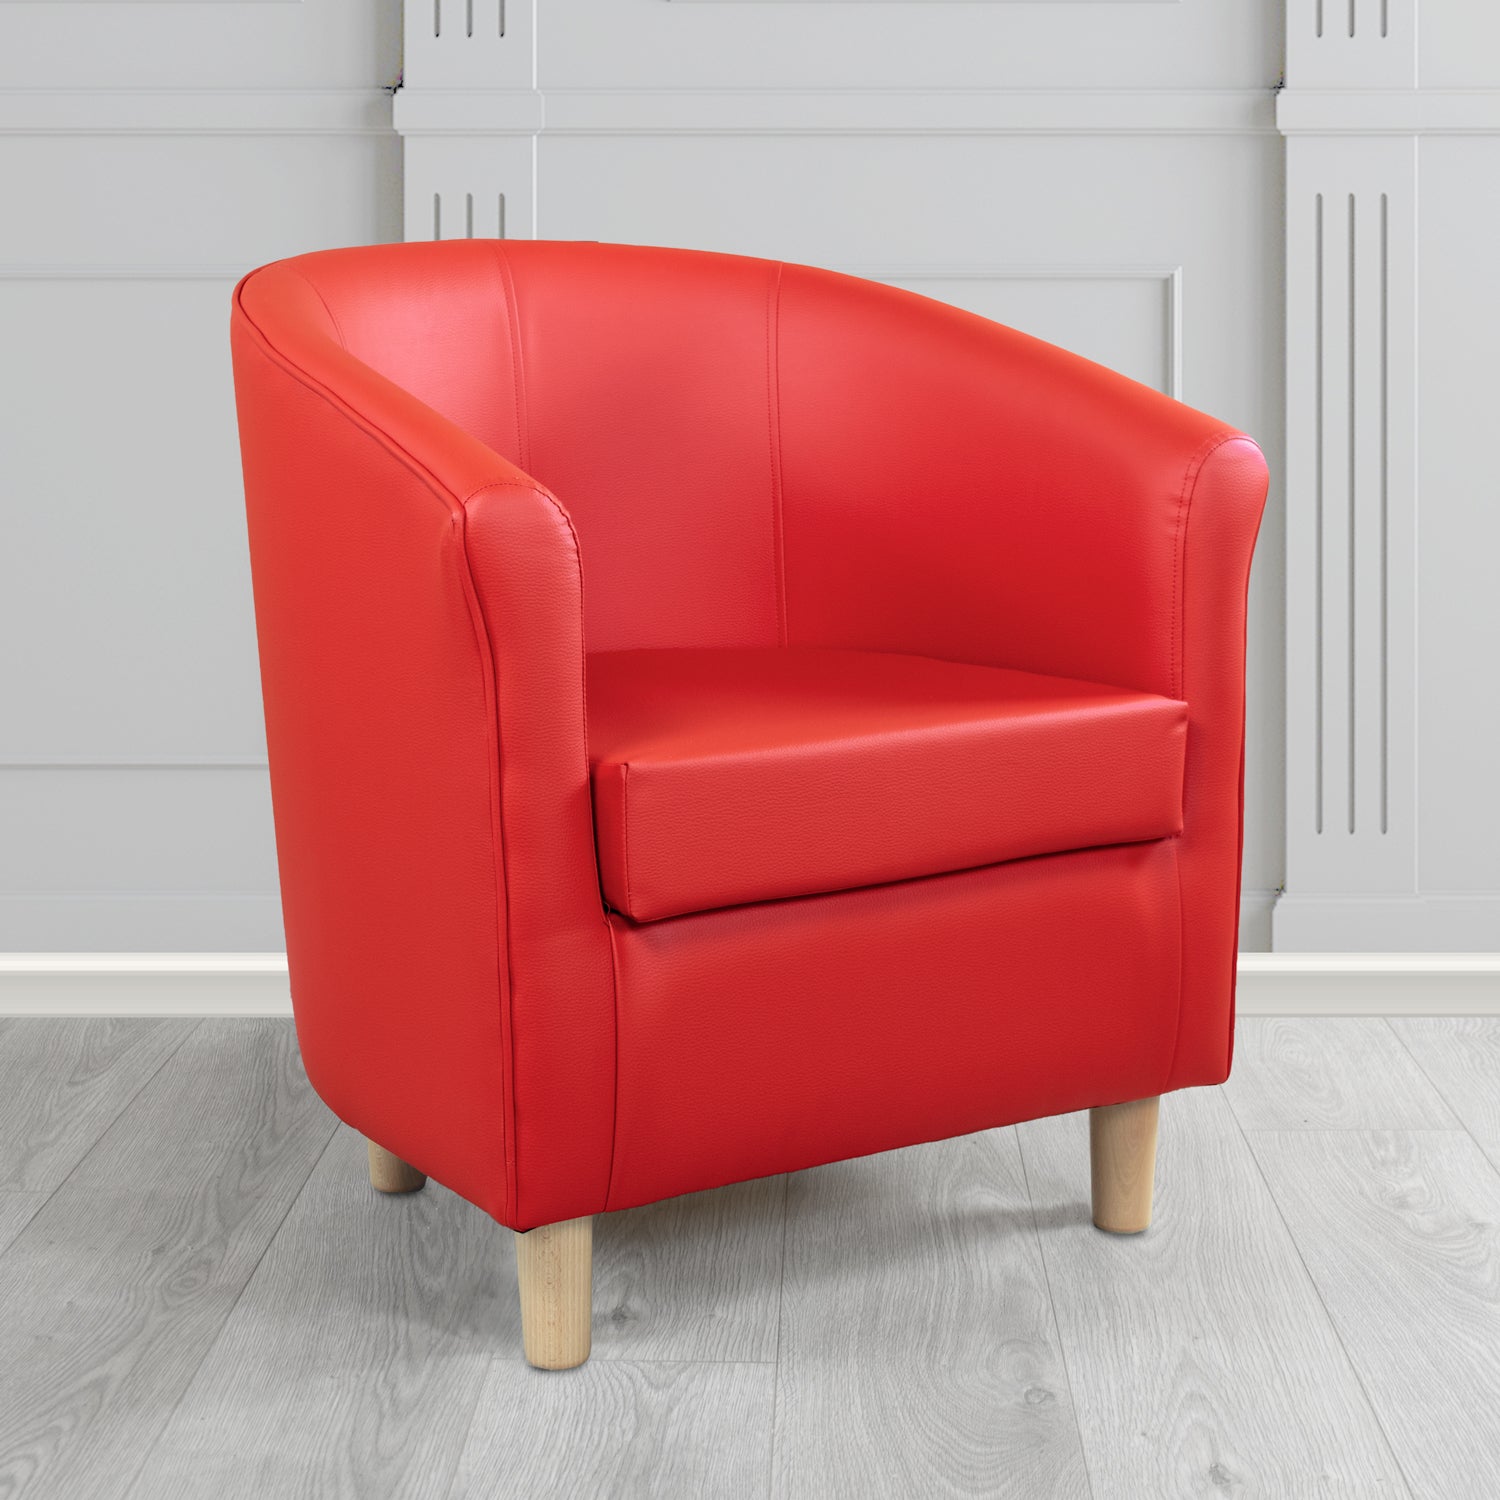 Tuscany Tub Chair in Madrid Rouge Faux Leather - The Tub Chair Shop